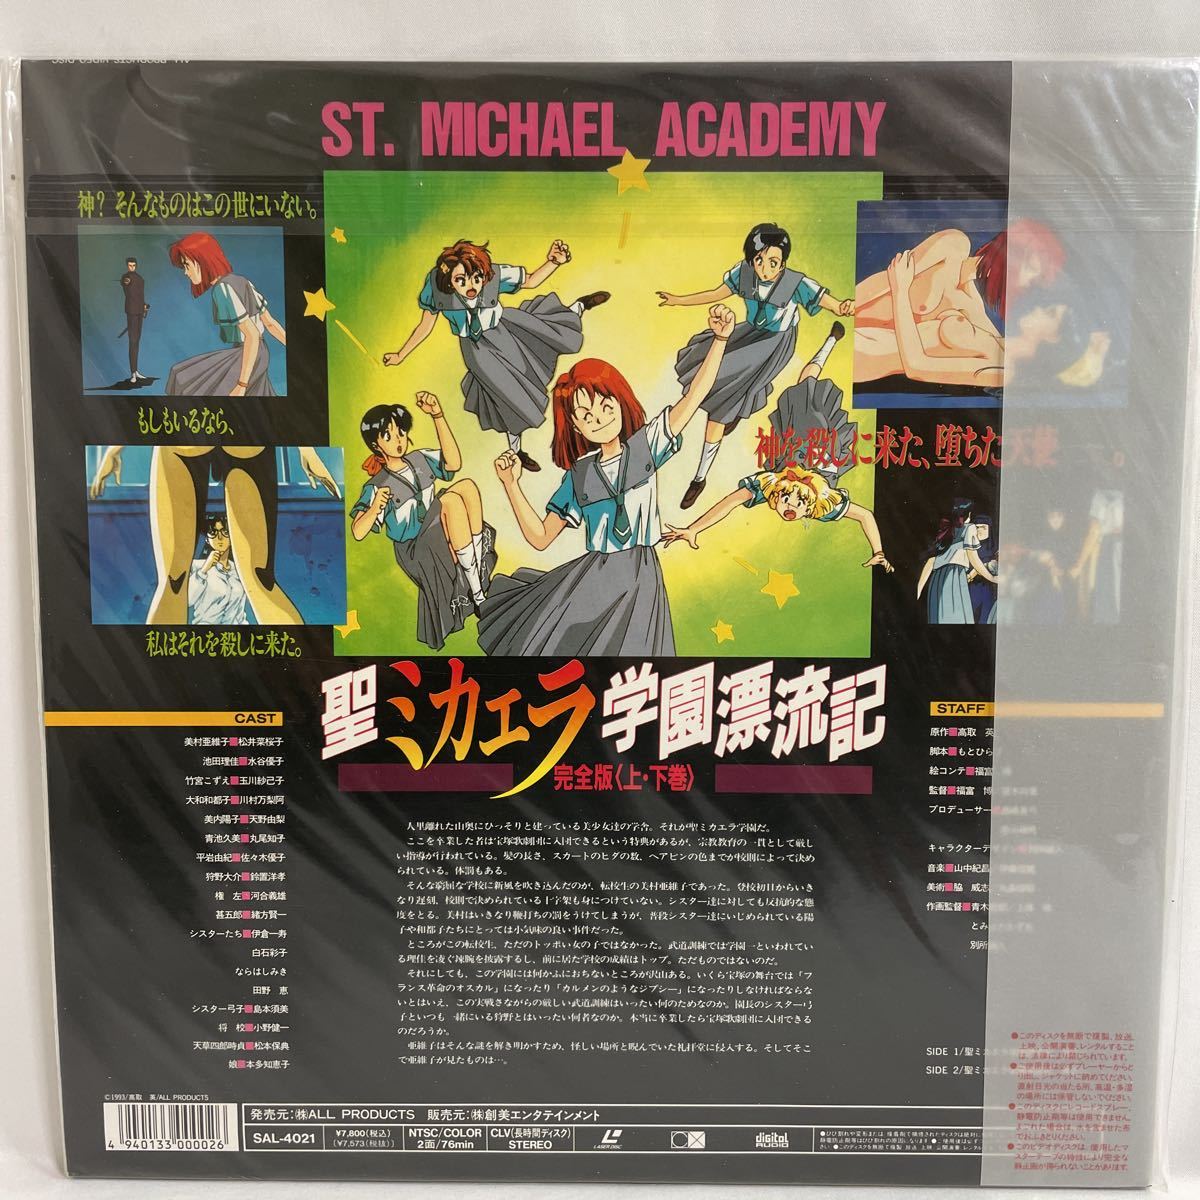 .mikaela an educational institution .. chronicle complete version ( on * under volume ) laser disk 223